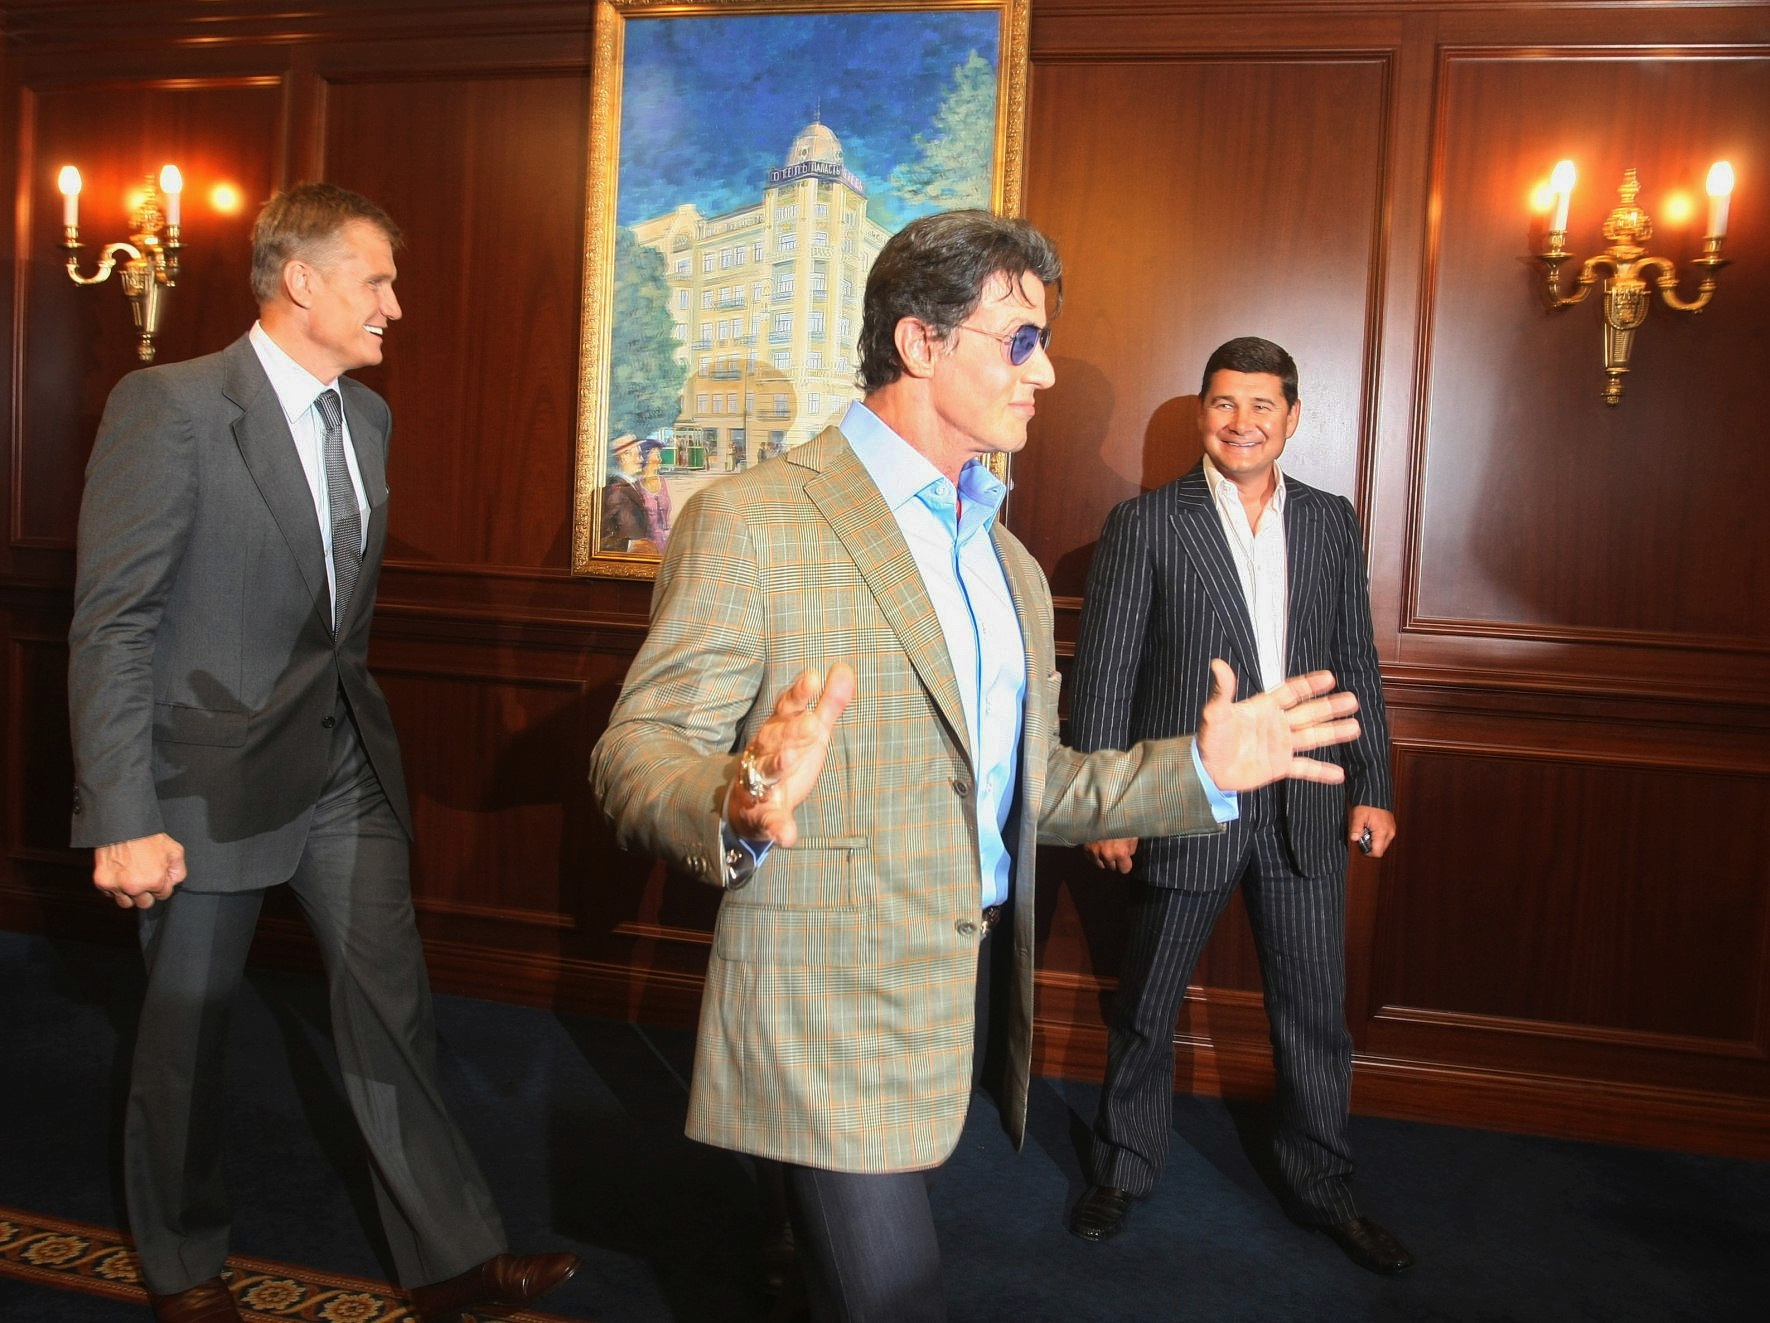 Hollywood actors Dolph Lundgren (L), Sylvester Stallone (C), and a businessman Alexander Onishchenko (R) during a press conference on the movie launch in Kyiv on Aug. 7 of 2010.